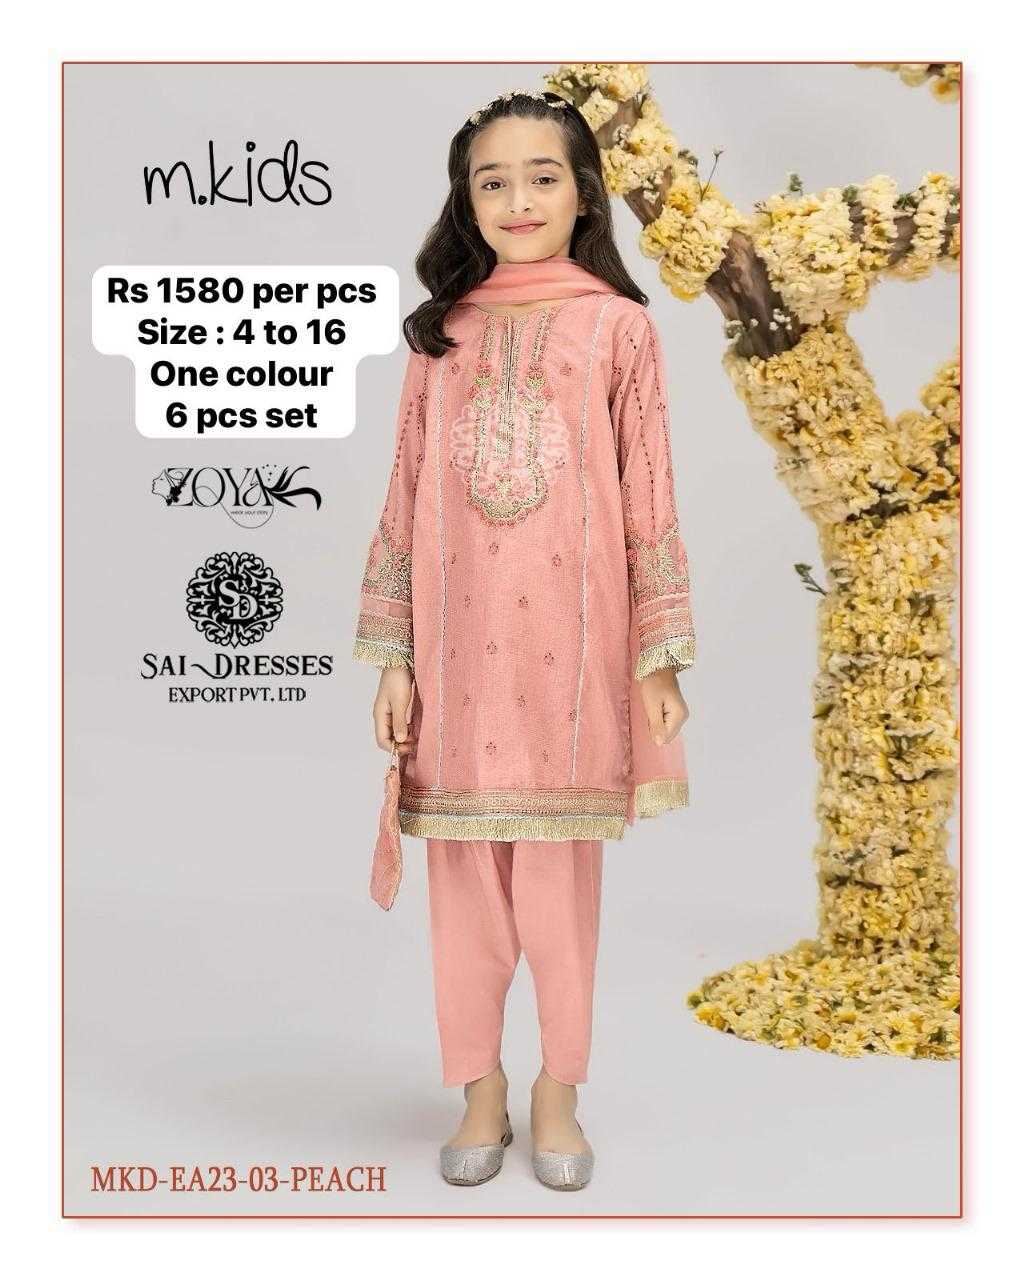 SAI DRESSES PRESENT D.NO 31 READY TO PARTY WEAR GHARARA STYLE DESIGNER PAKISTANI KIDS COMBO SUITS IN WHOLESALE RATE IN SURAT